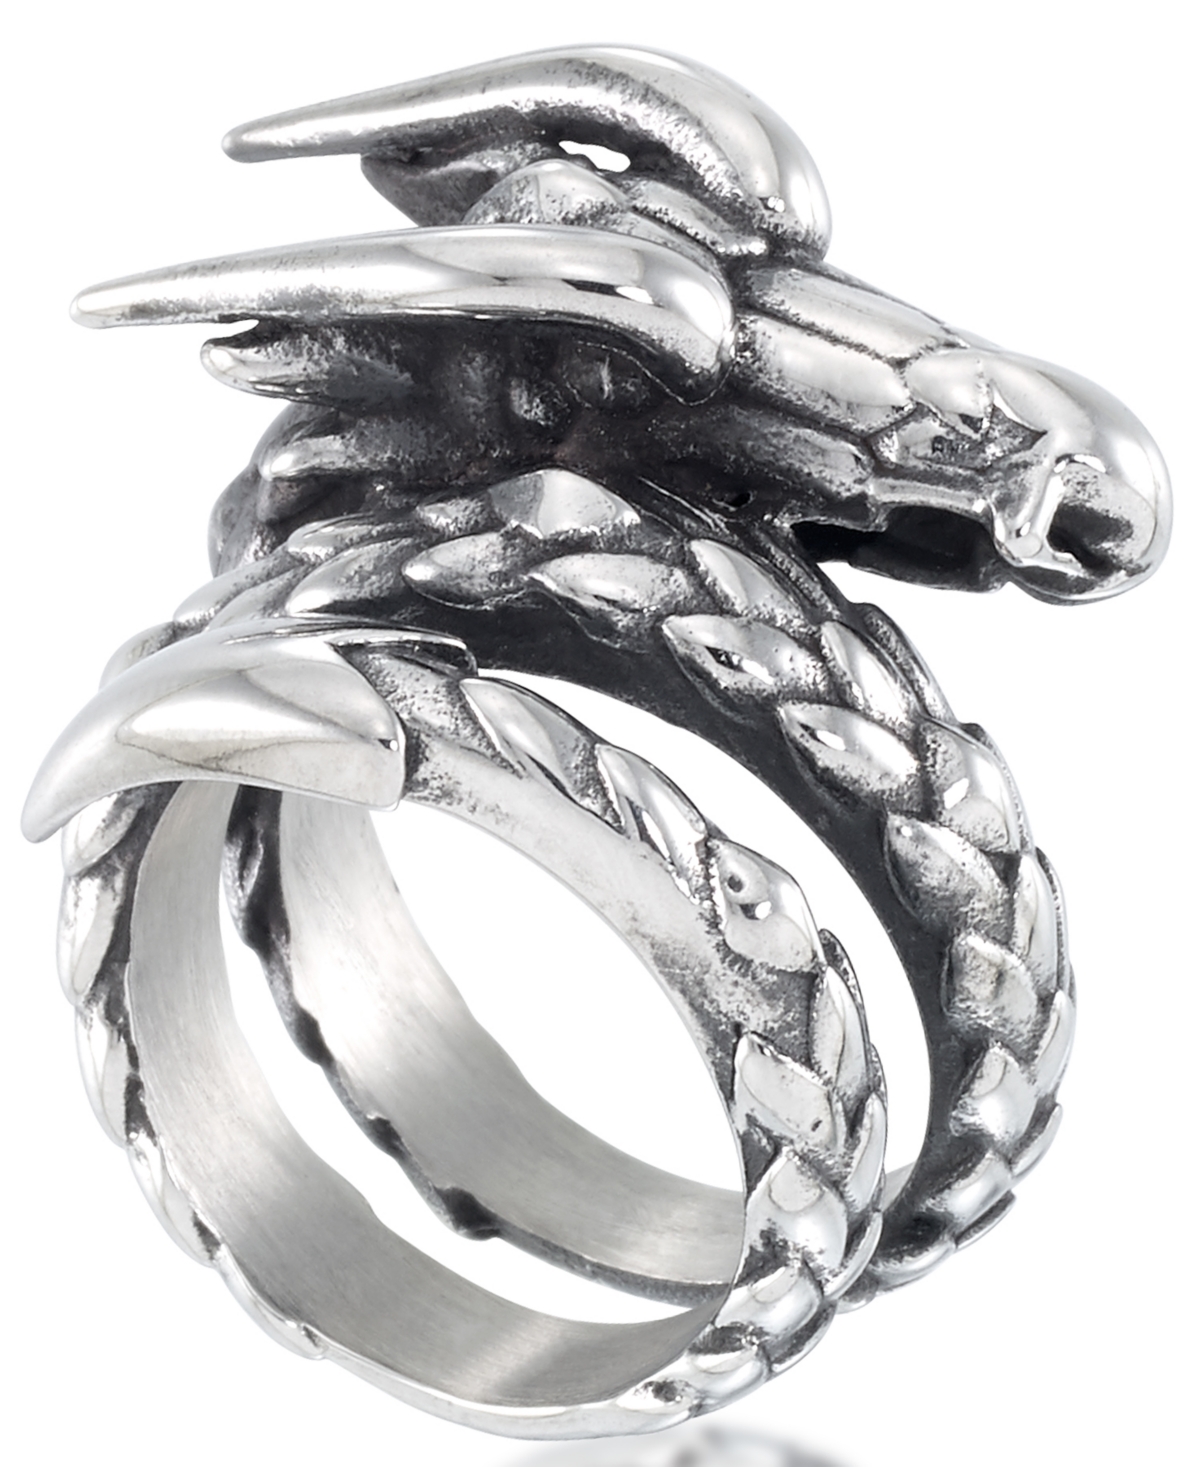 Men's Dragon Coil Ring in Stainless Steel - Stainless Steel